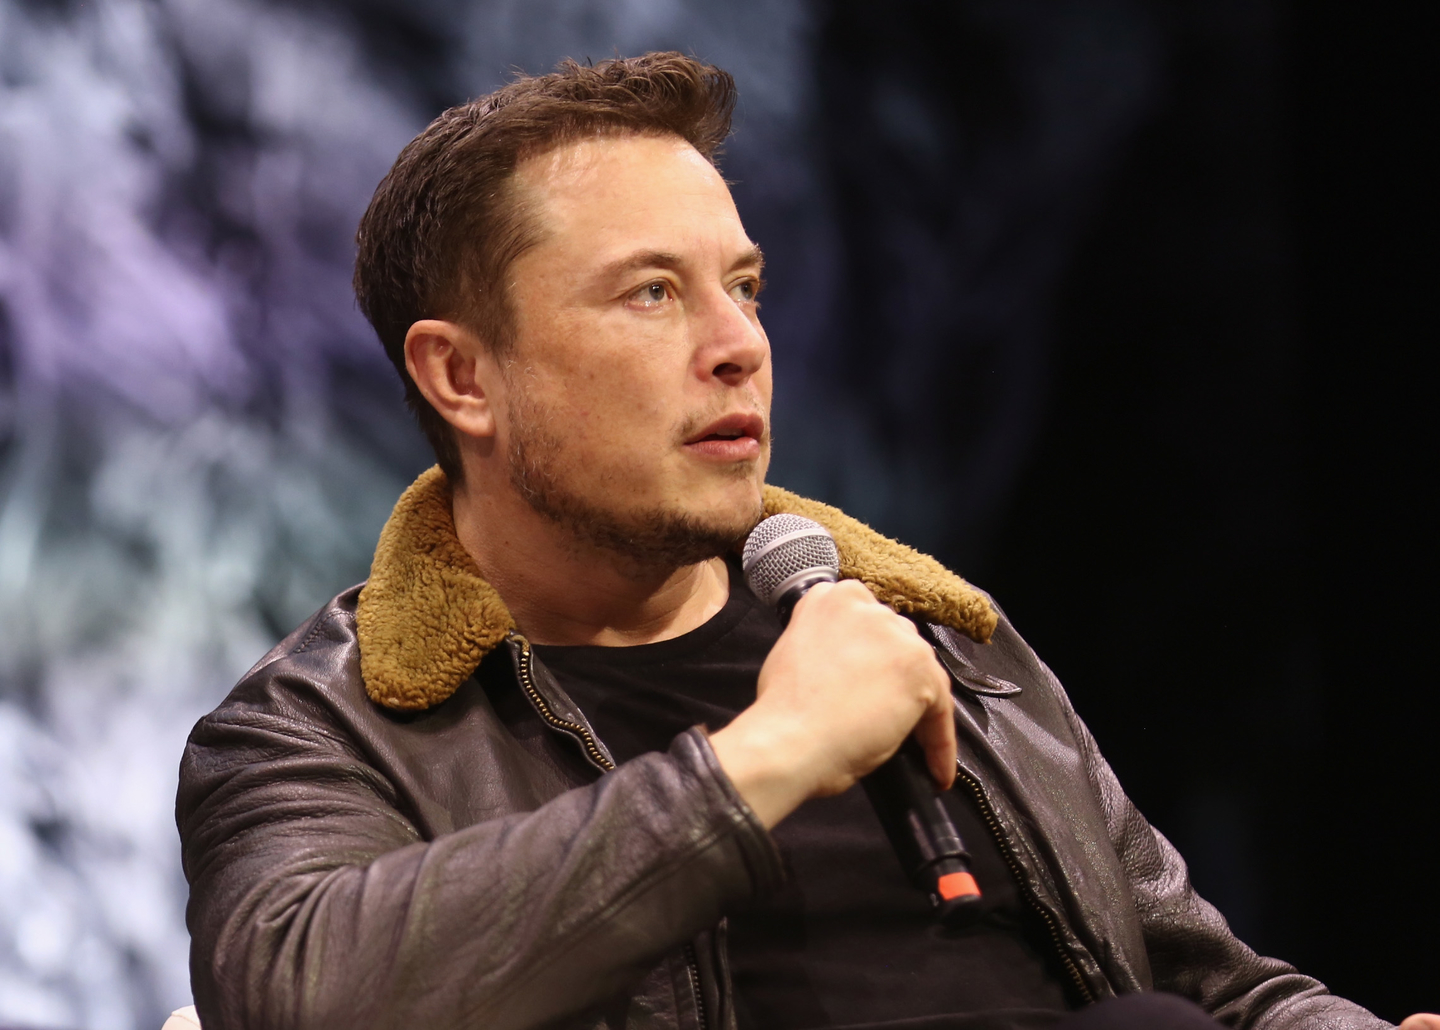 Elon Musk during “Elon Musk Answers Your Questions!” Photo by Diego Donamaria/Getty Images for SXSW